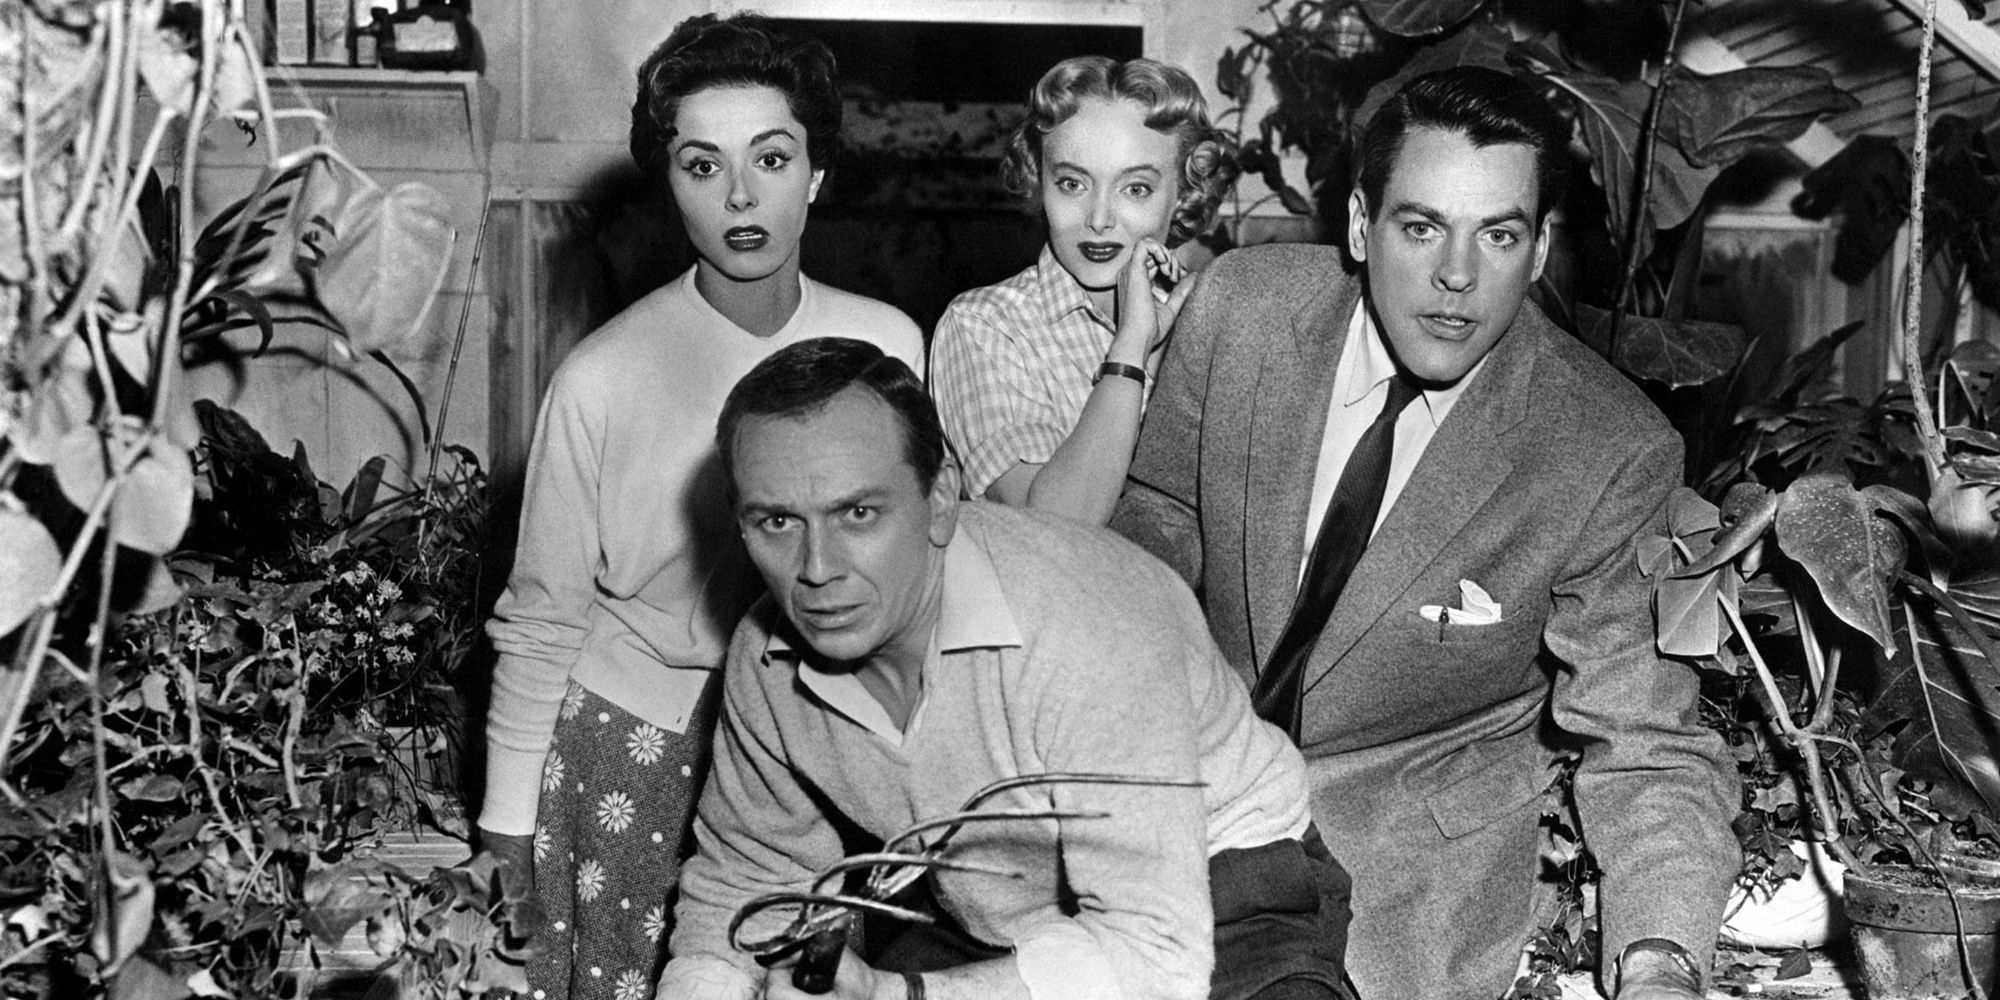 A group of characters looking curiously at something off-camera in Invasion of the Body Snatchers